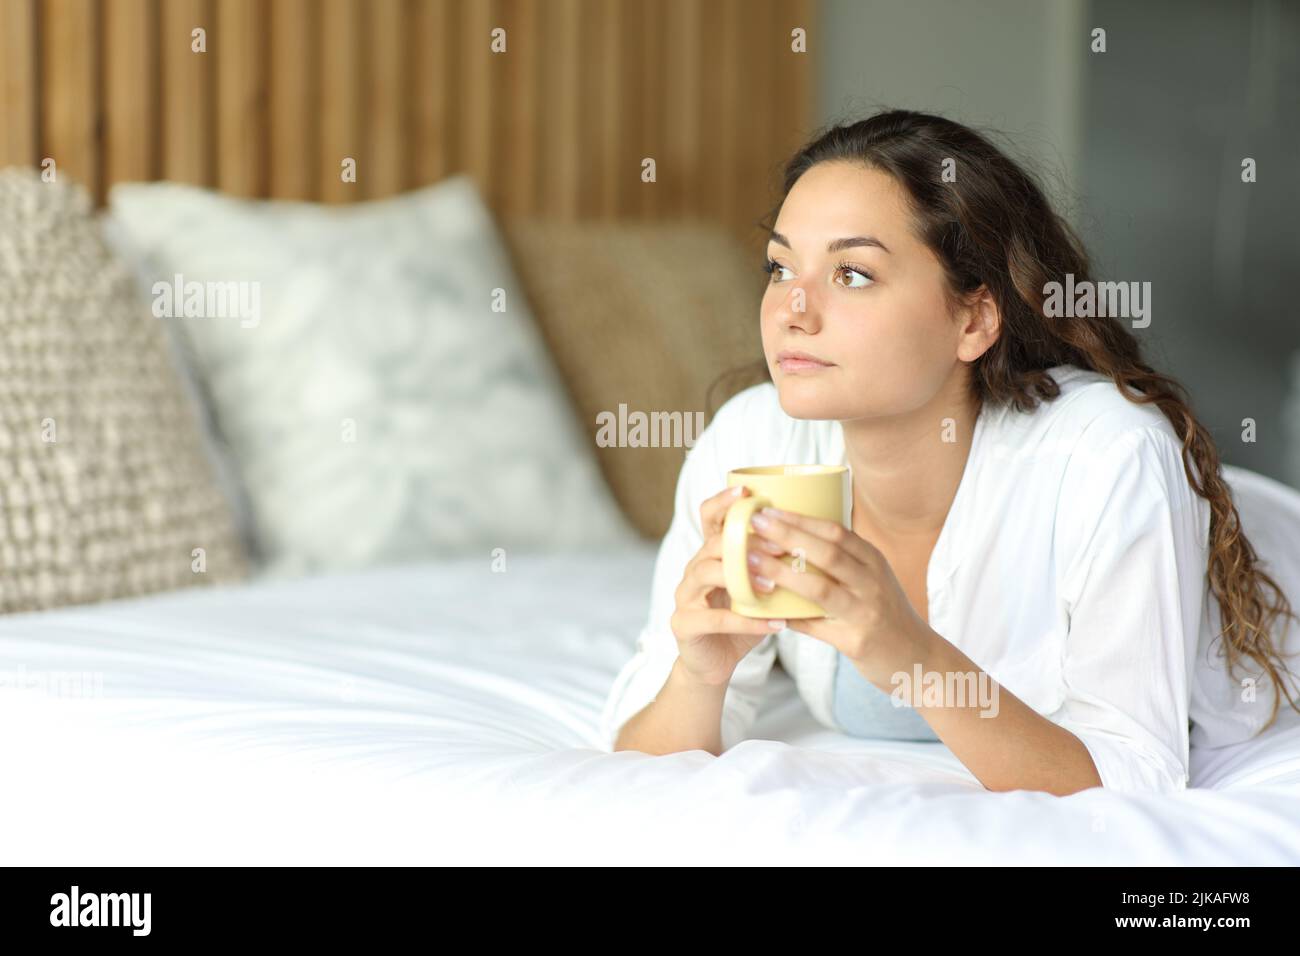 Distracted woman looking away drinking coffee lying on a bed in the bedroom Stock Photo